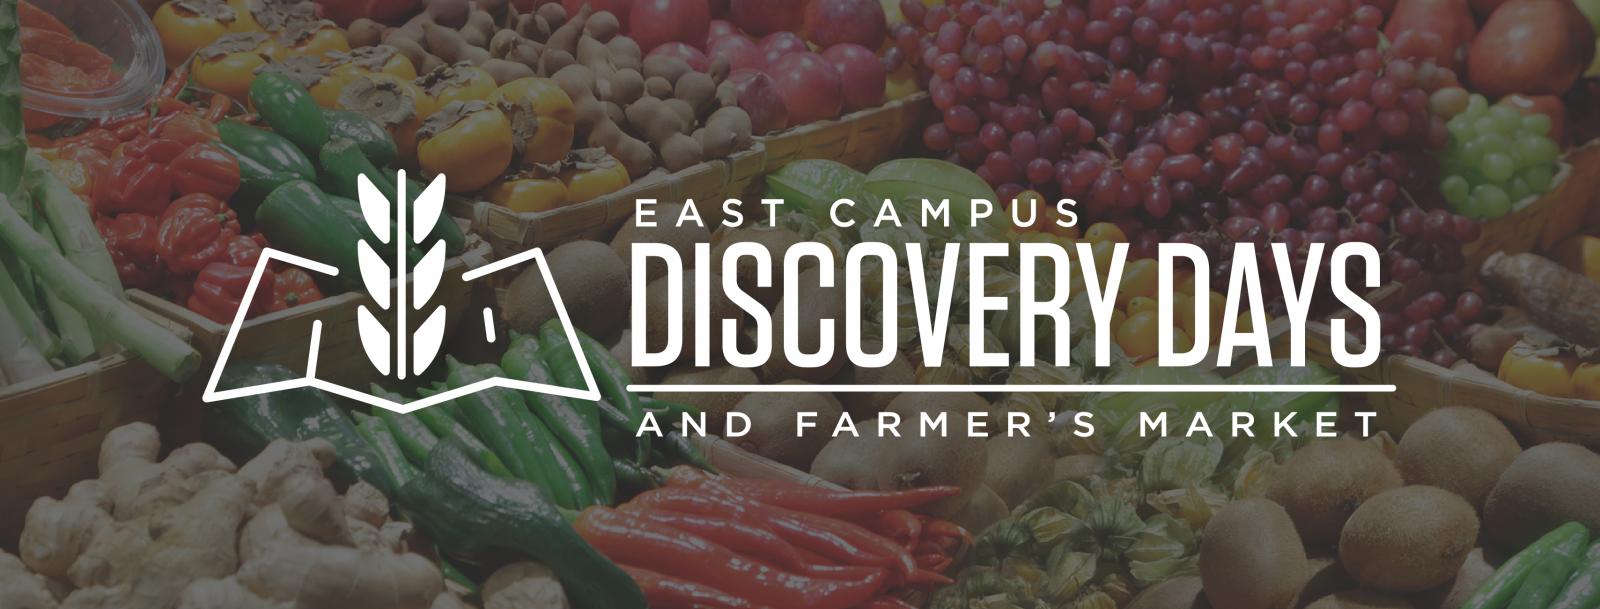 East Campus Discovery Days and Farmer's Market graphic.